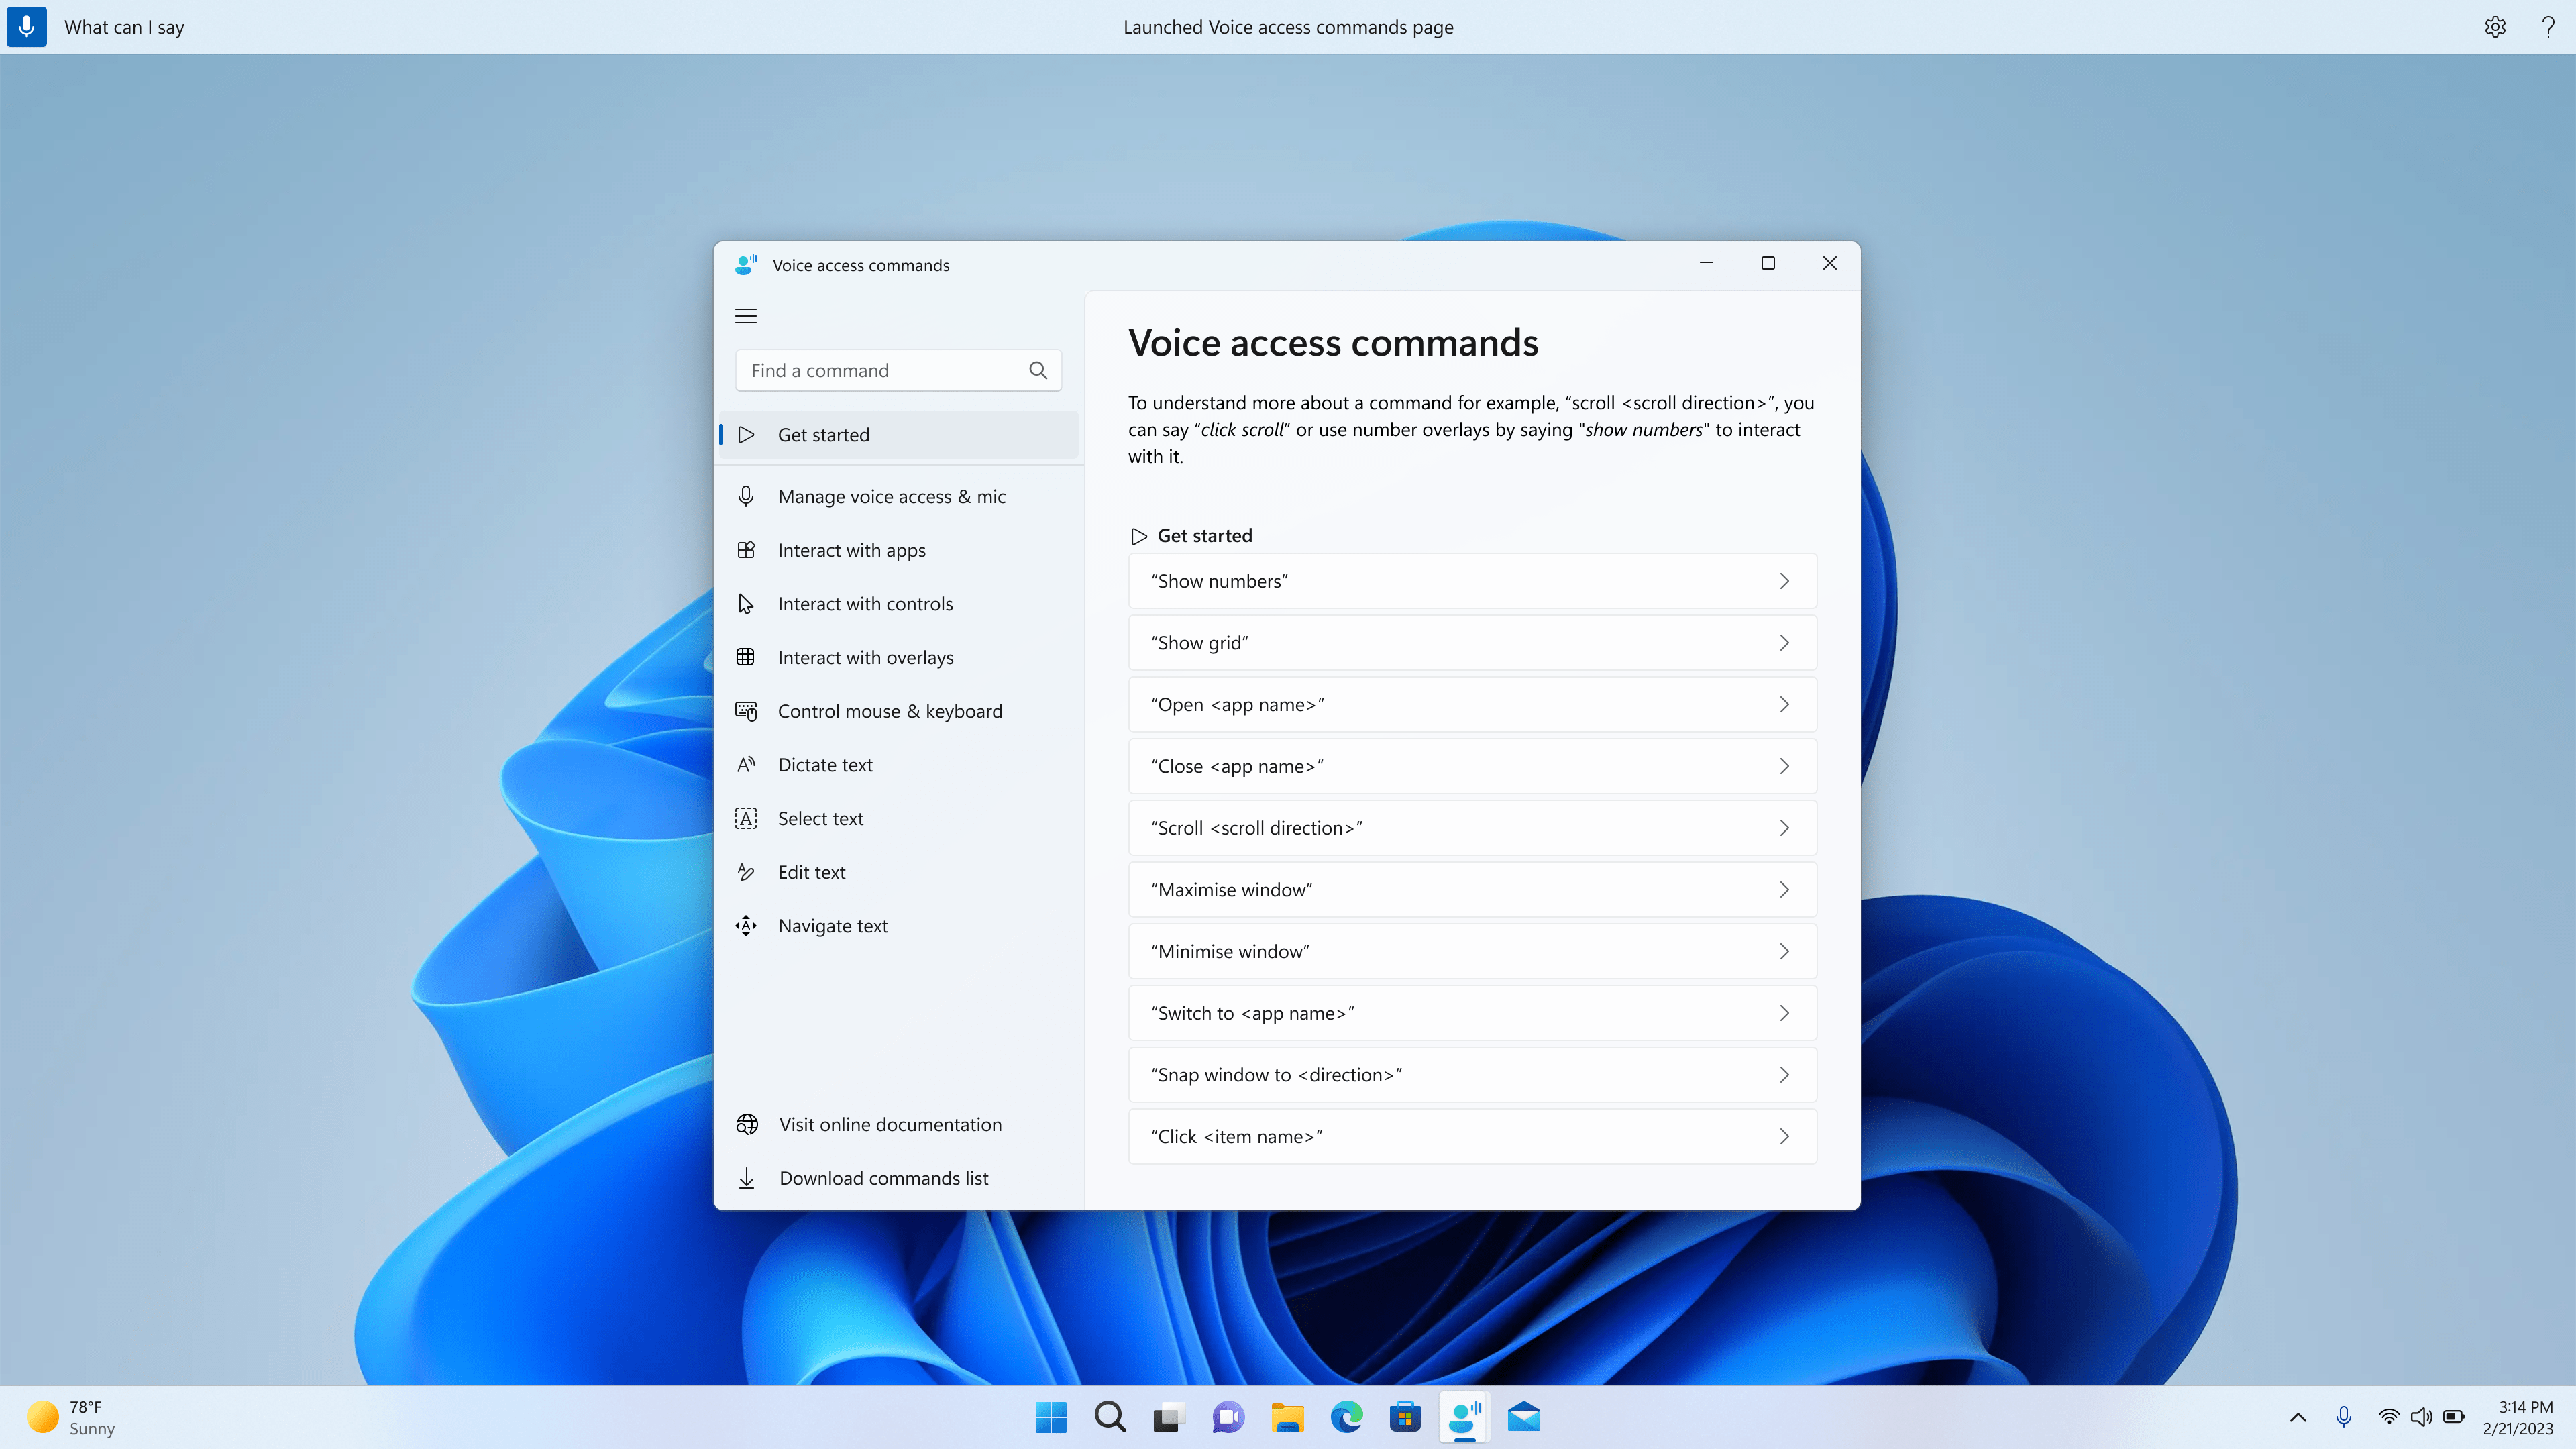 Redesigned voice access page